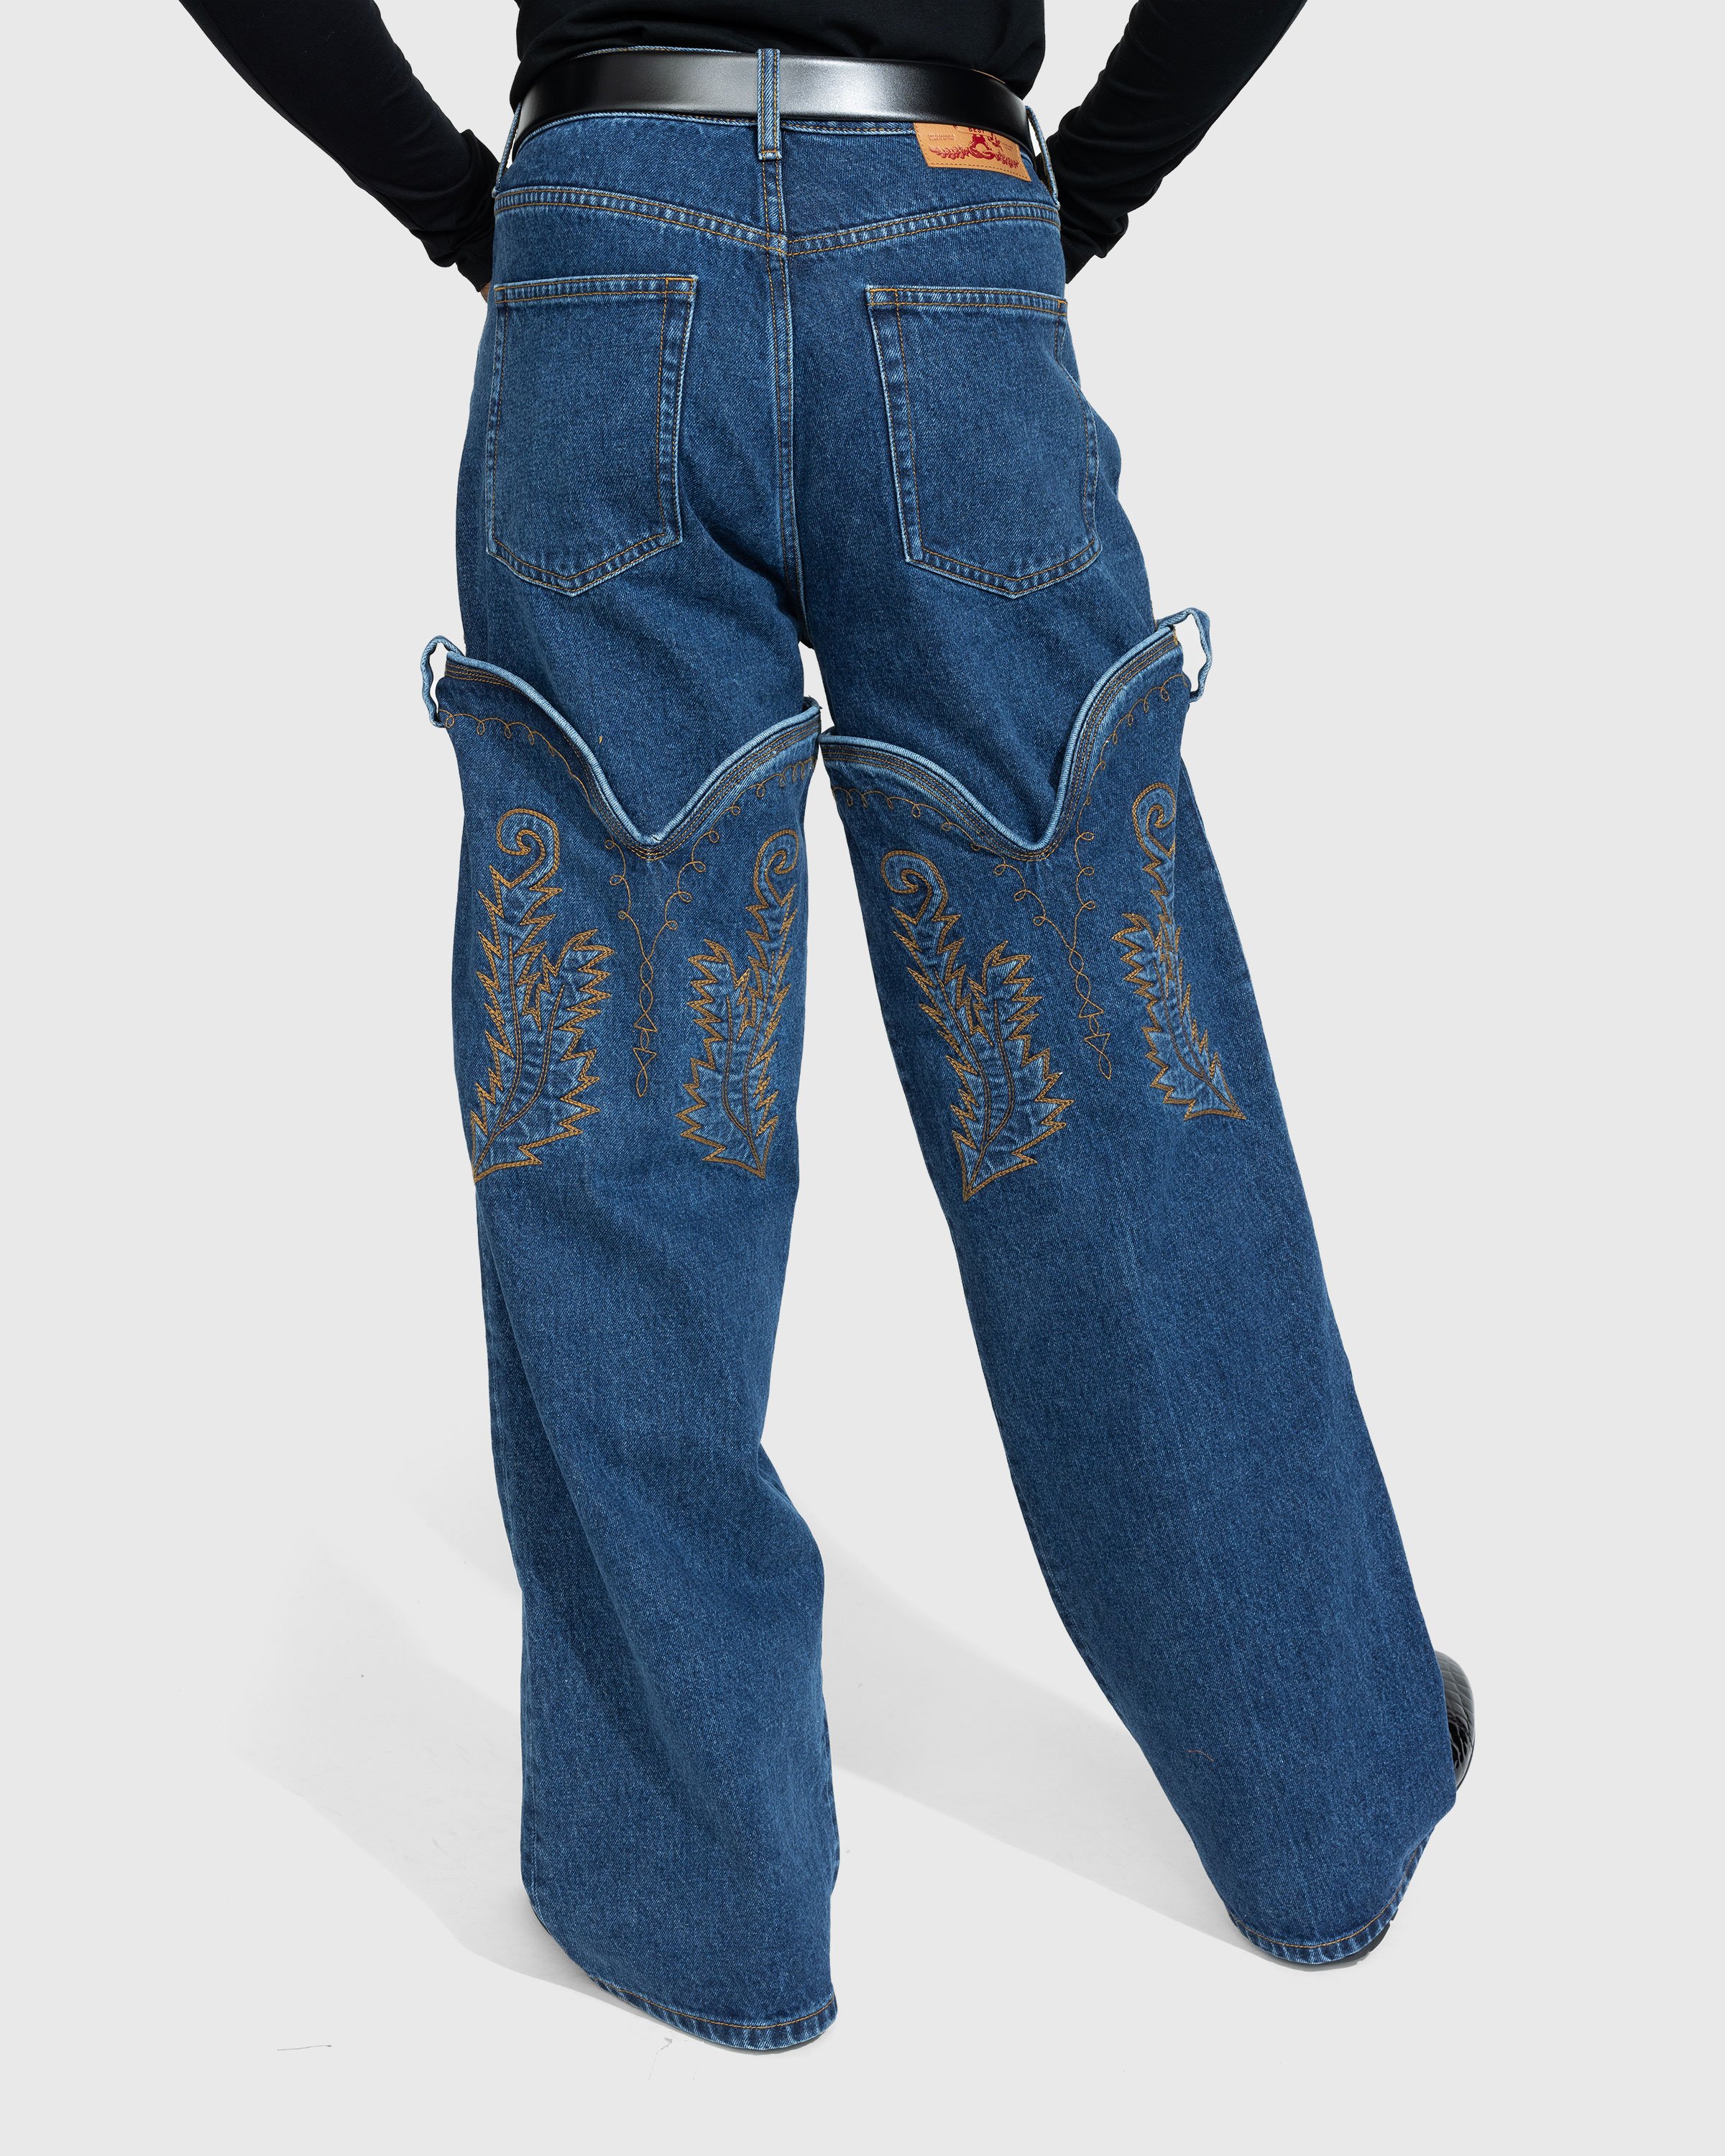 Y/Project - Classic Maxi Cowboy Cuff Jeans Navy - Clothing - Blue - Image 4